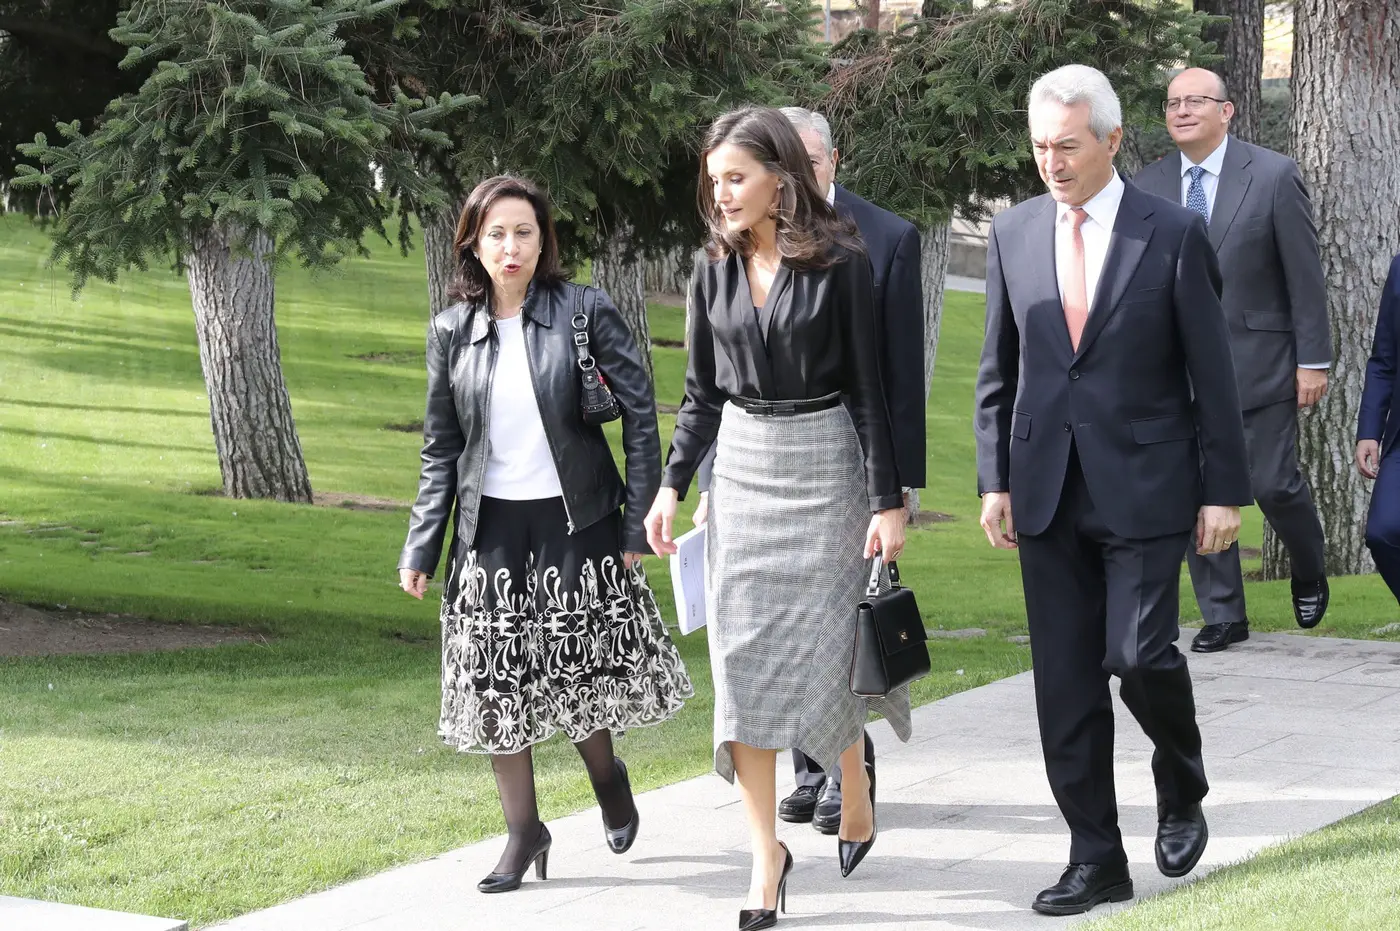 Queen Letizia of Spain presented friendship awards wearing black blouse and gray skirt